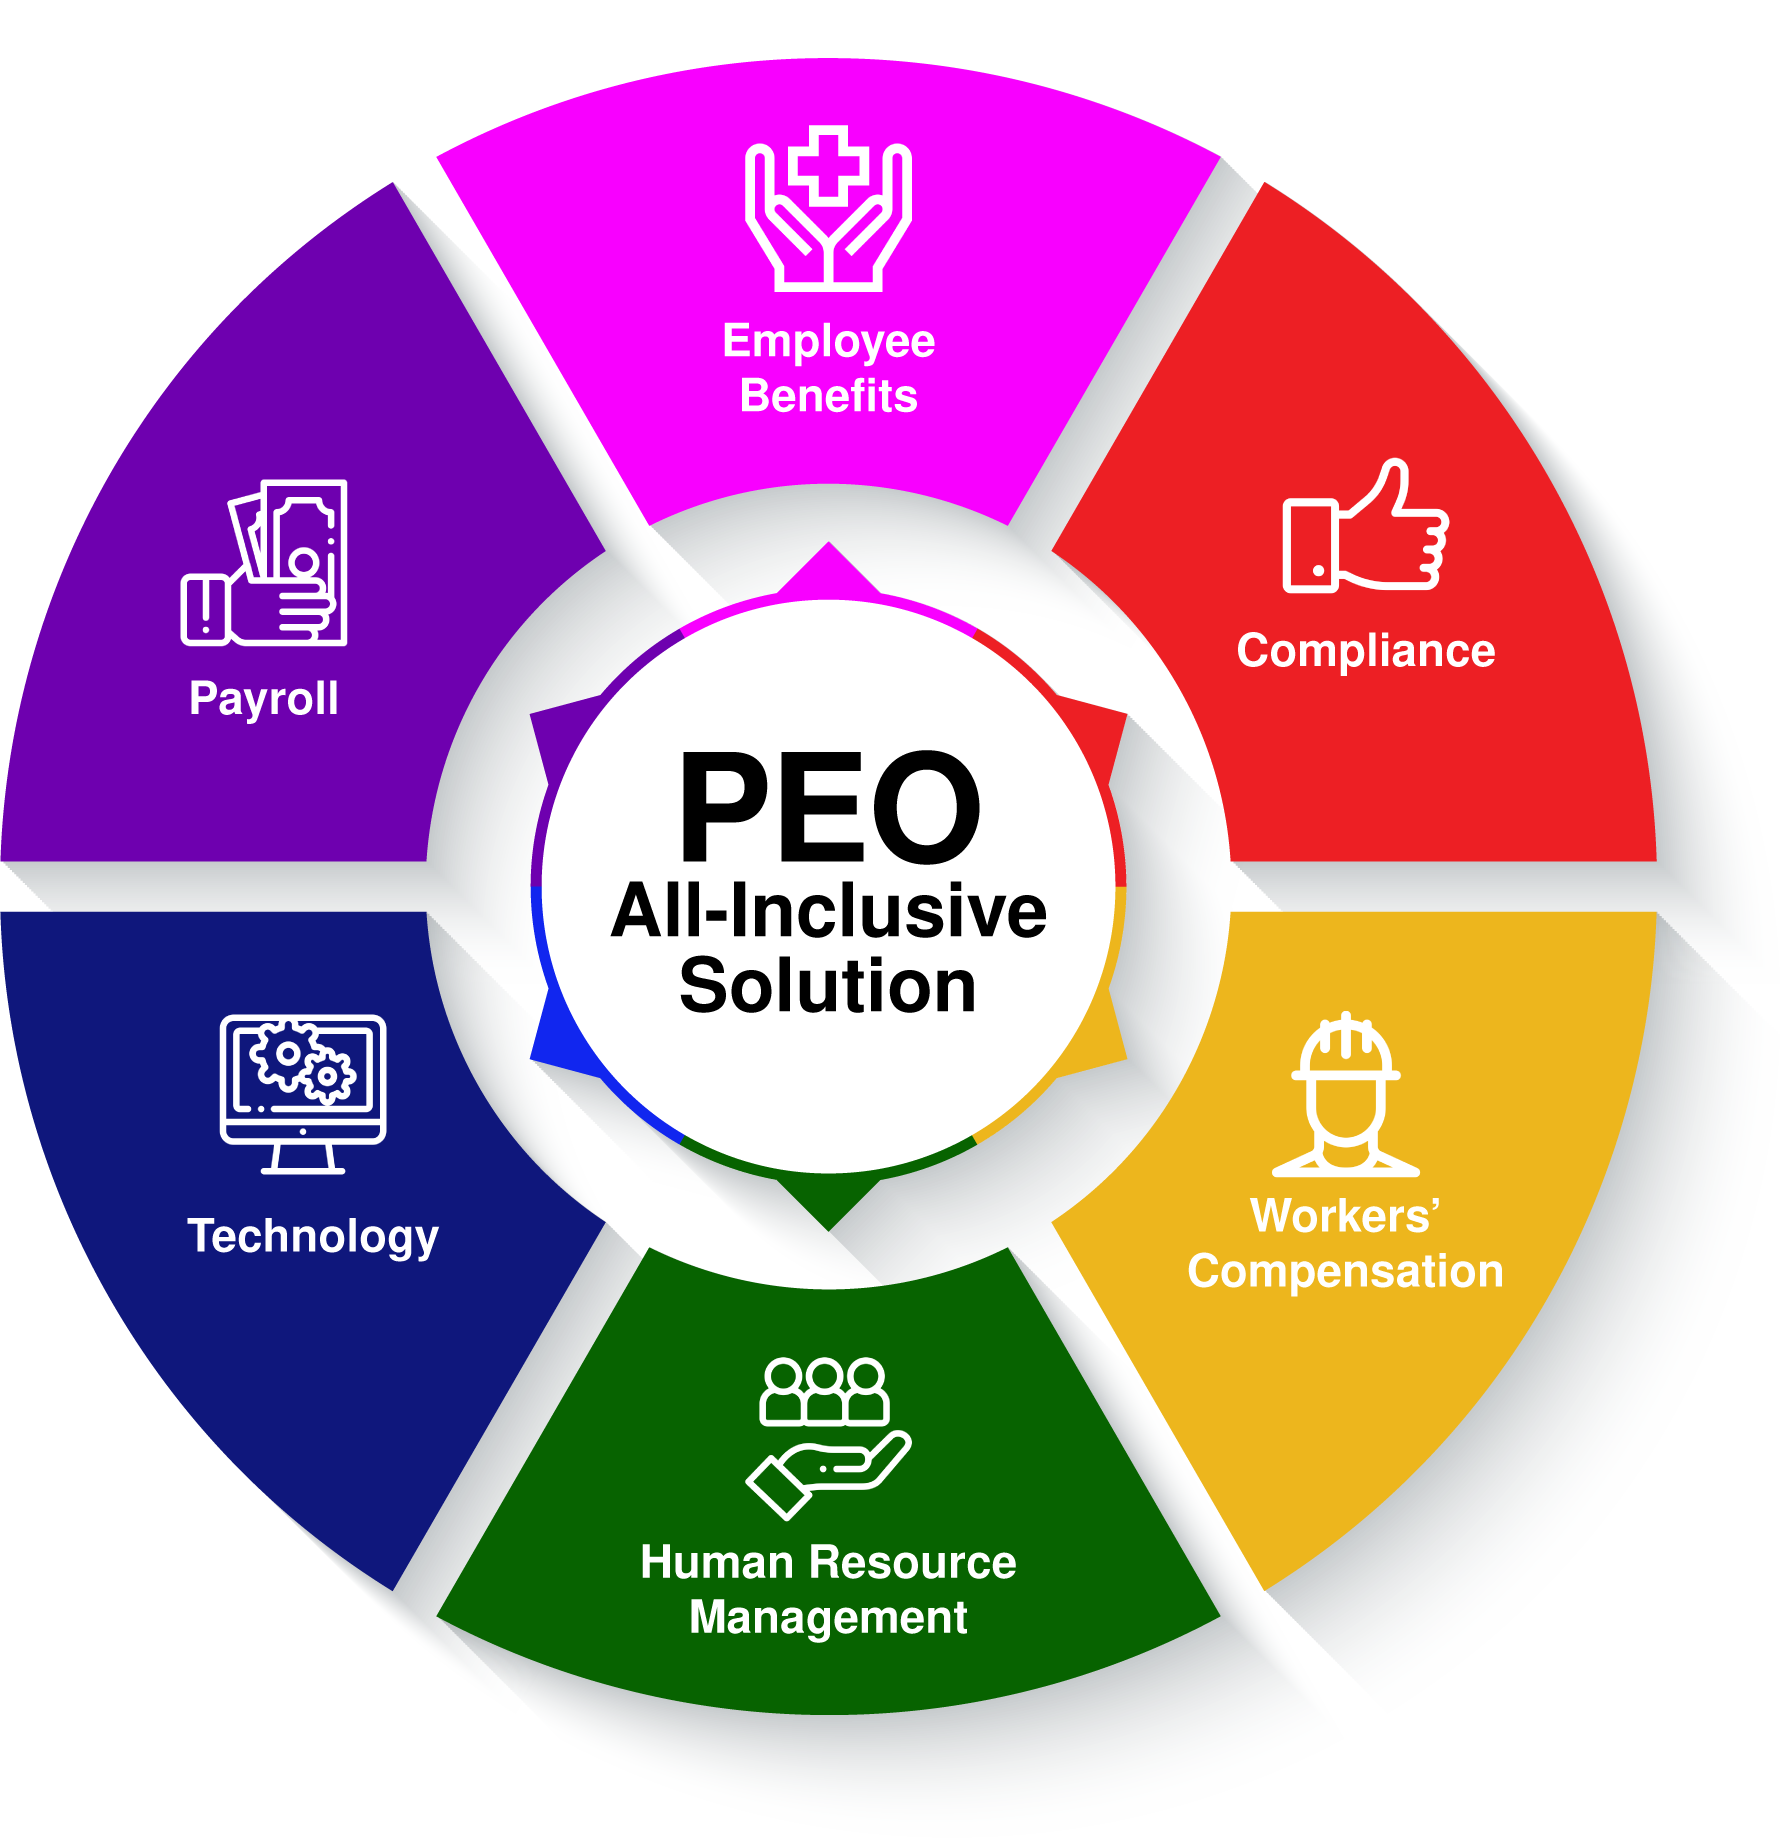 PEO All-Inclusive Solution